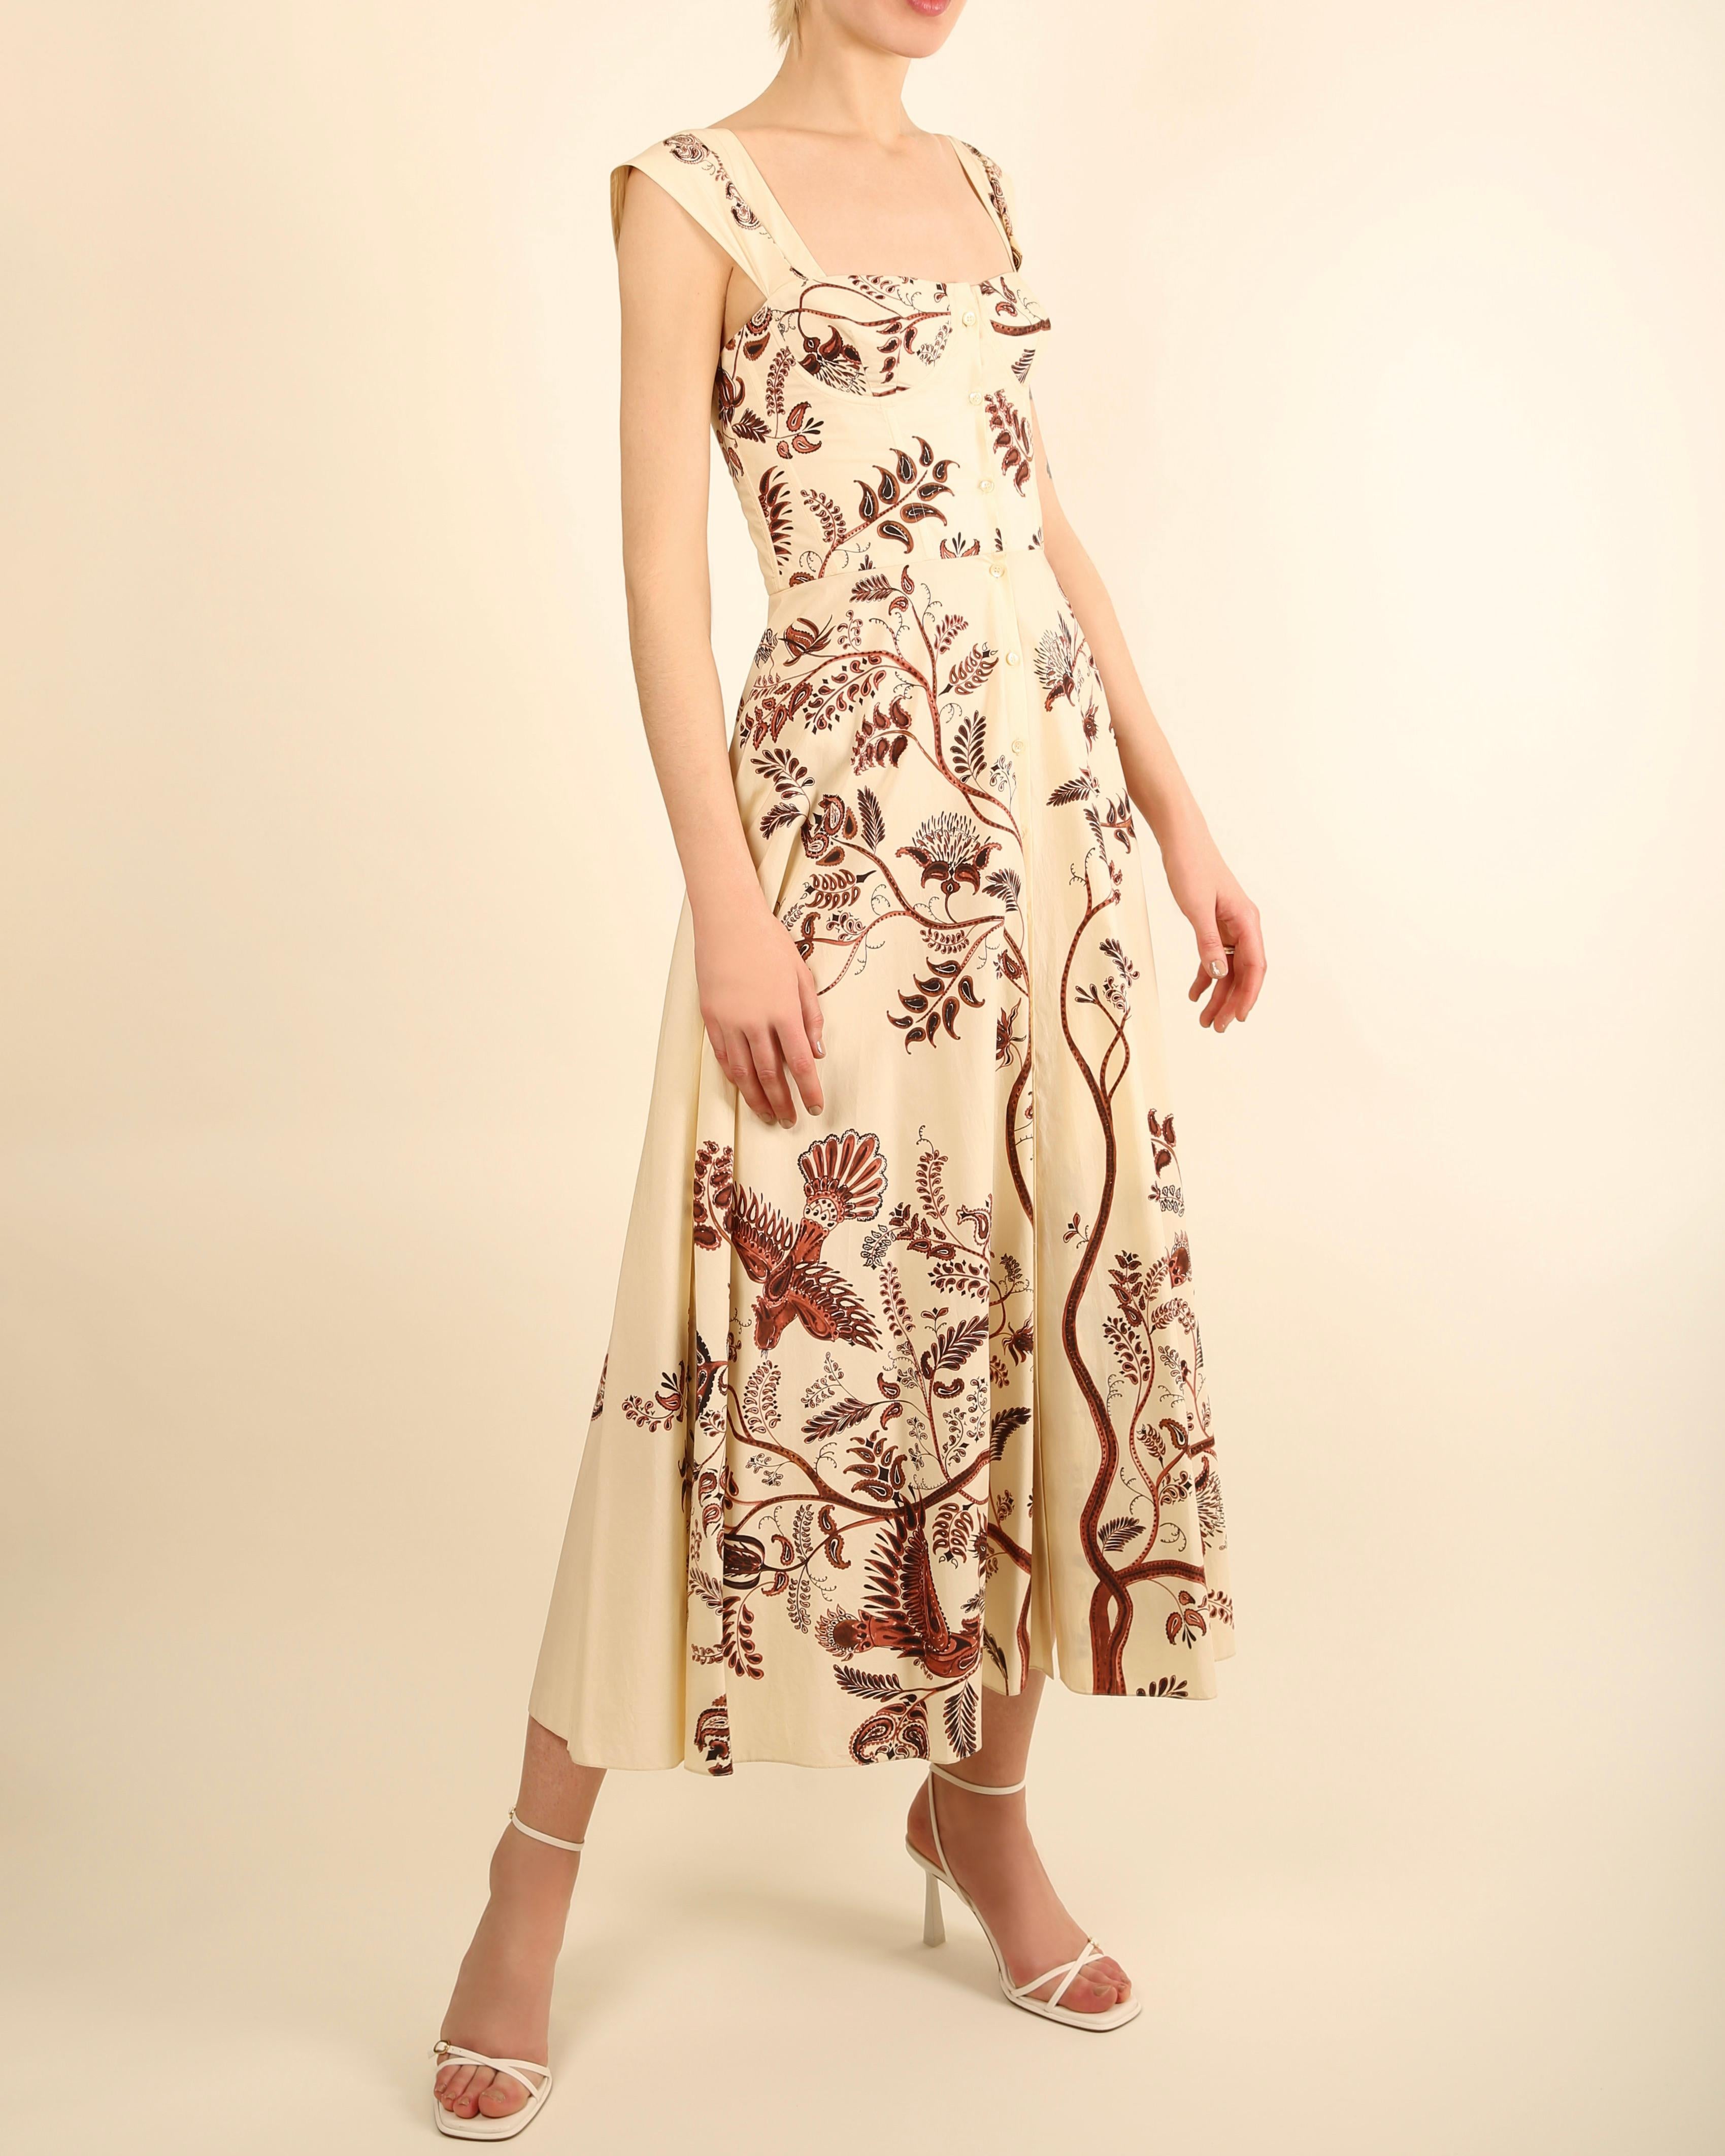 Christian Dior Resort 2018
Cream midi length dress with brown floral print
Boned corset upper with underwire cups
Button up front which is further secured by invisible hooks and a popper - these were possibly added on via the previous owner. Please